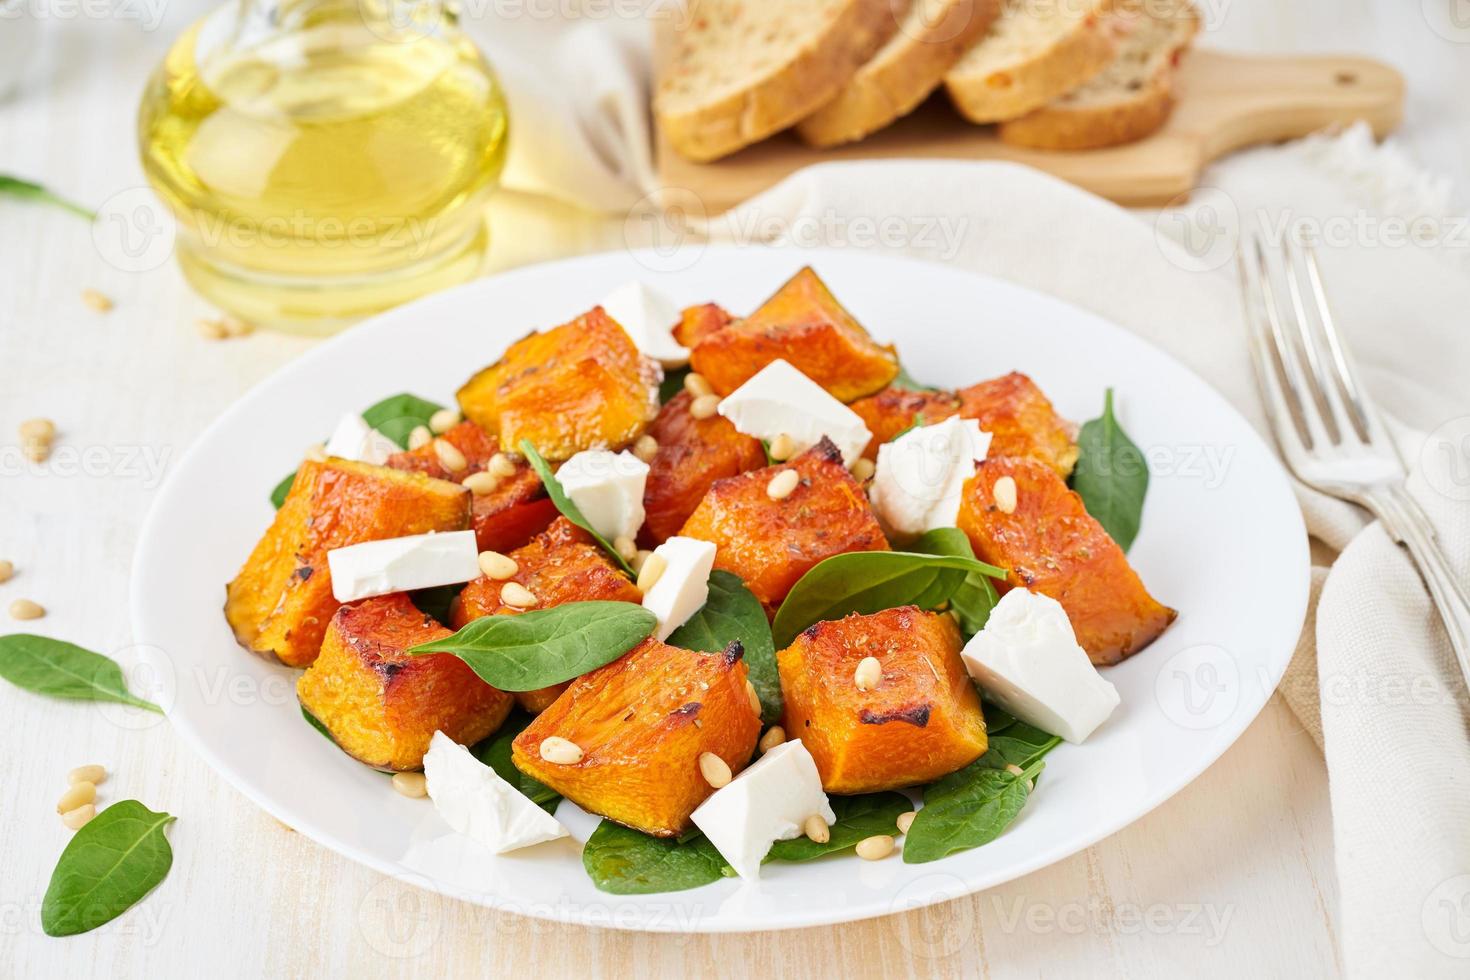 Salad with roasted pumpkin, feta cheese, spinach, nuts with honey and seasonings, side view photo